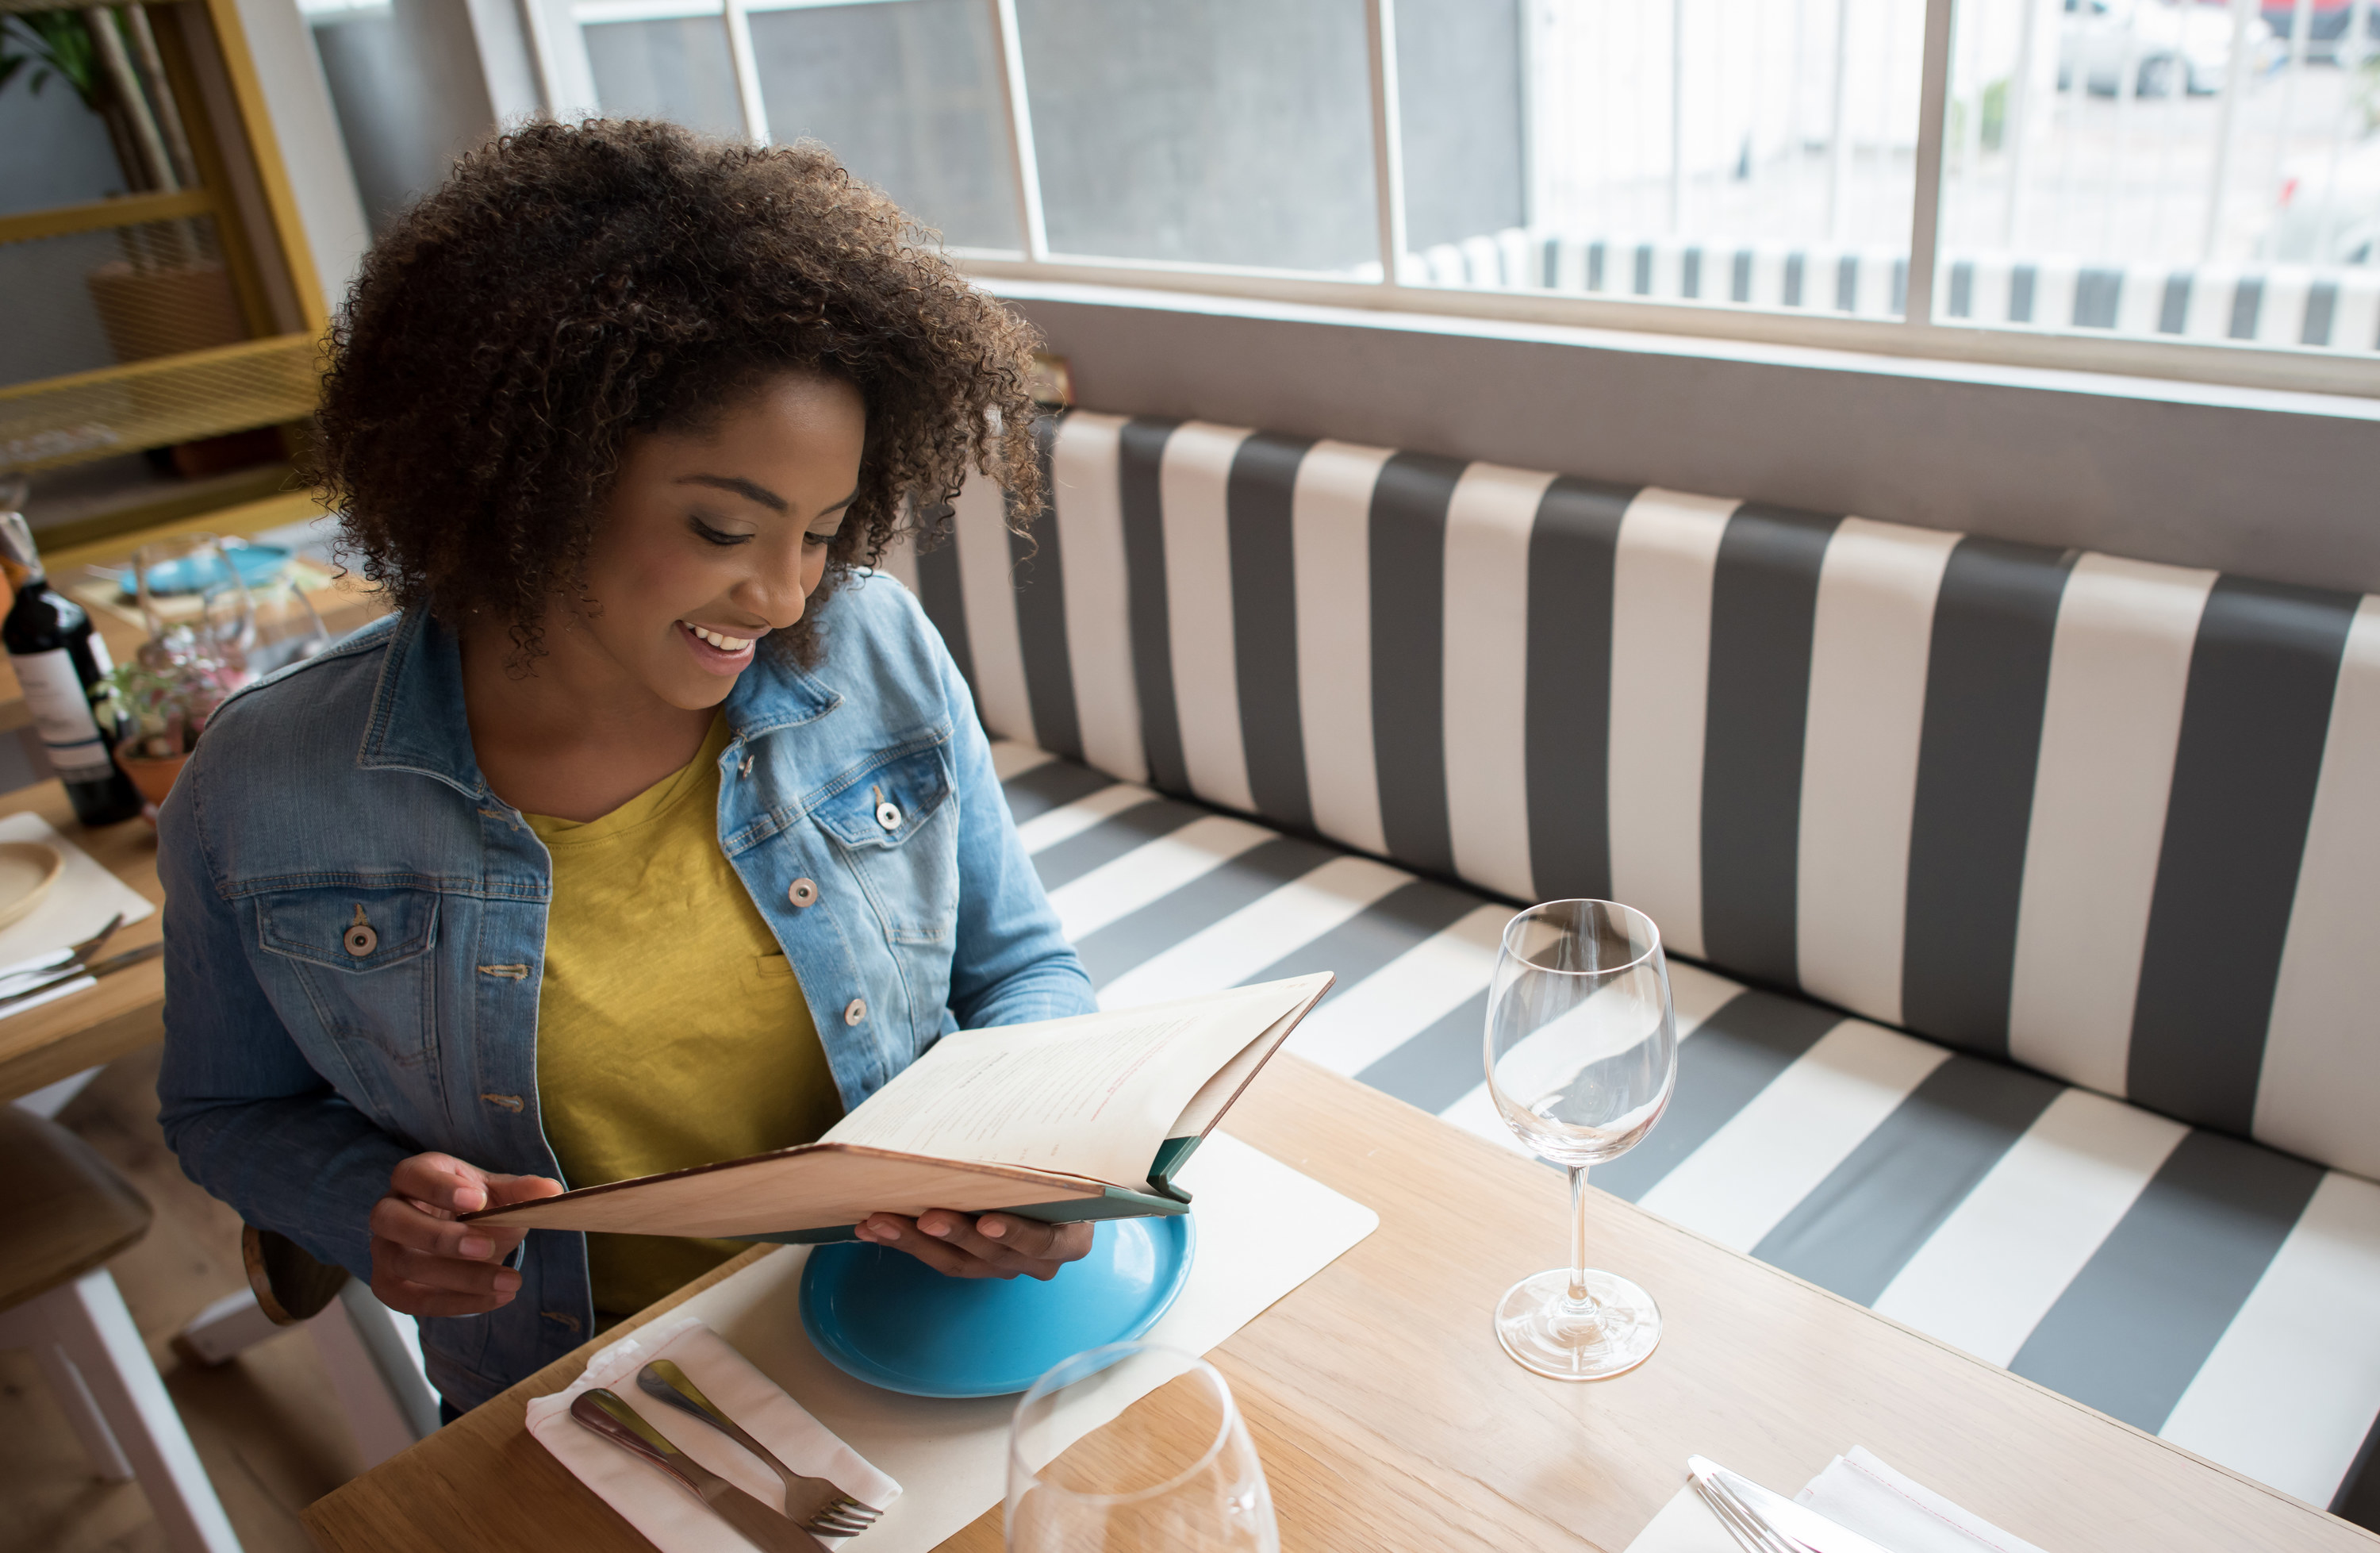 A woman in a jean jacket looking at a menu in a restaurant